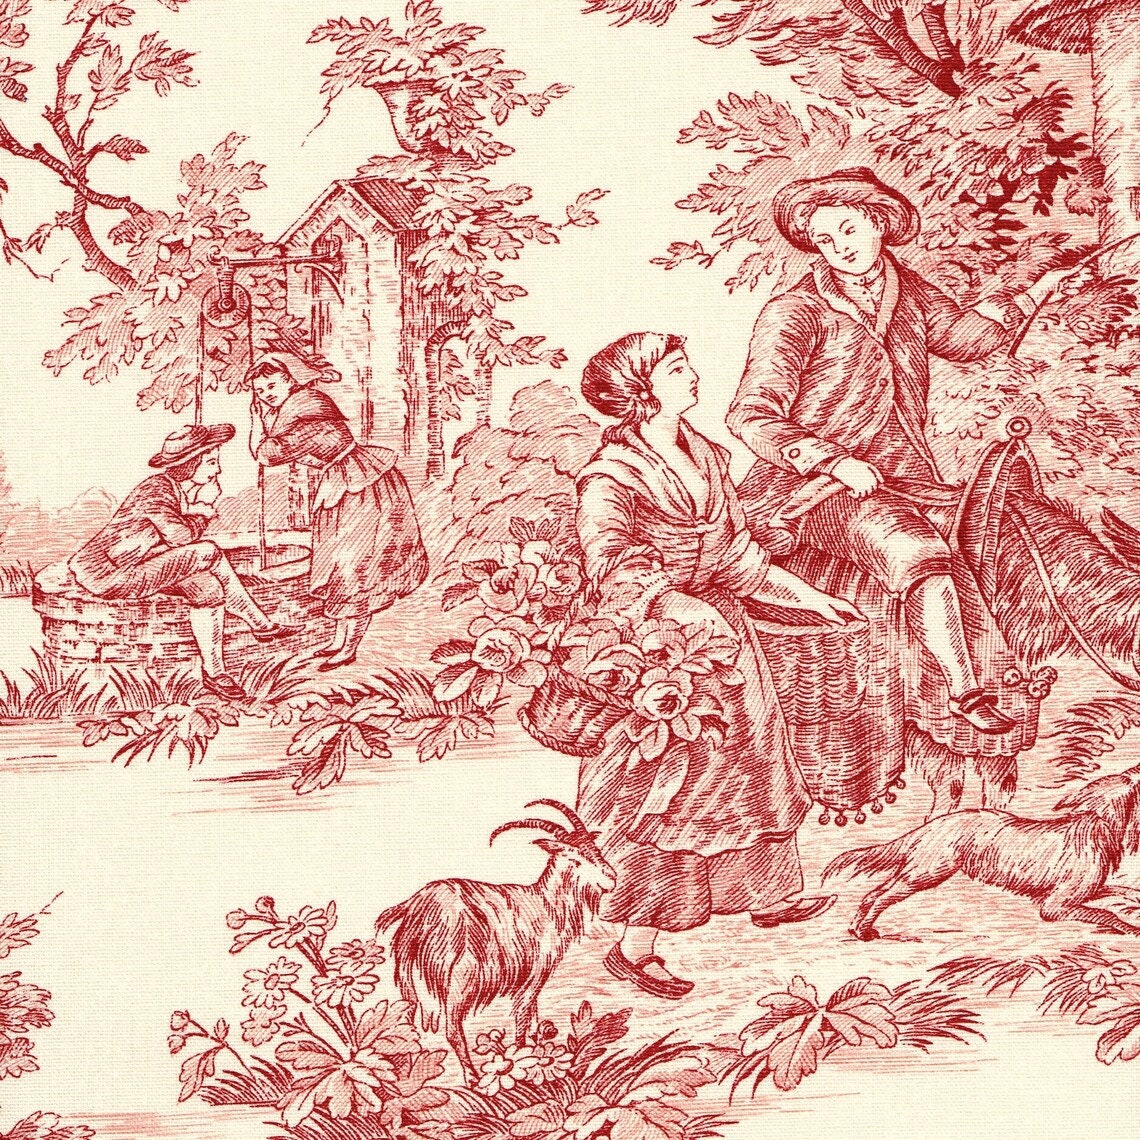 duvet cover in pastorale #6 red on cream french country toile